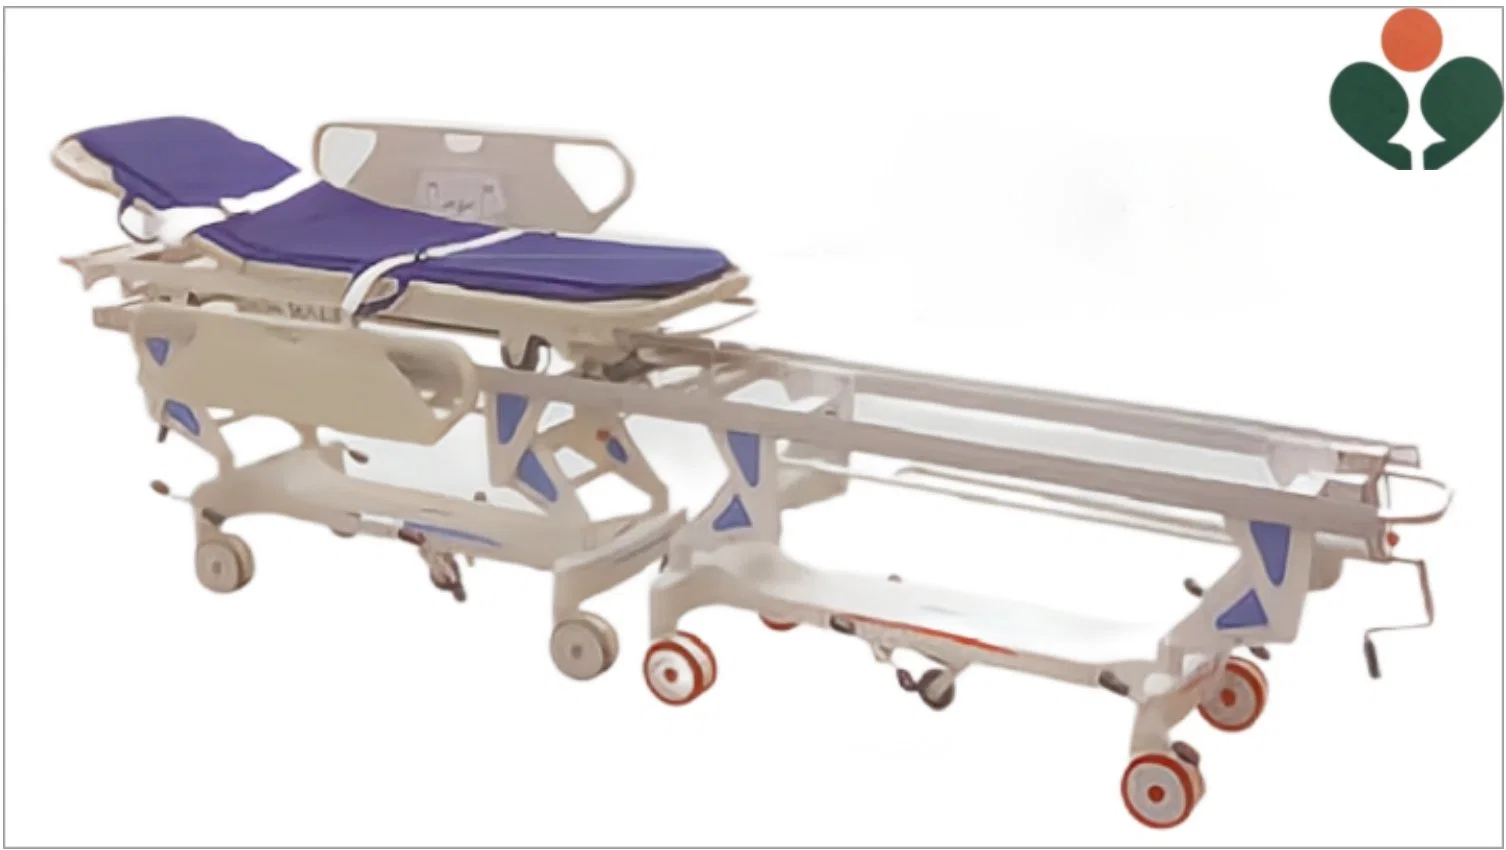 Medical Operation Connecting Trolley Medical Instrument Hospital Equipment